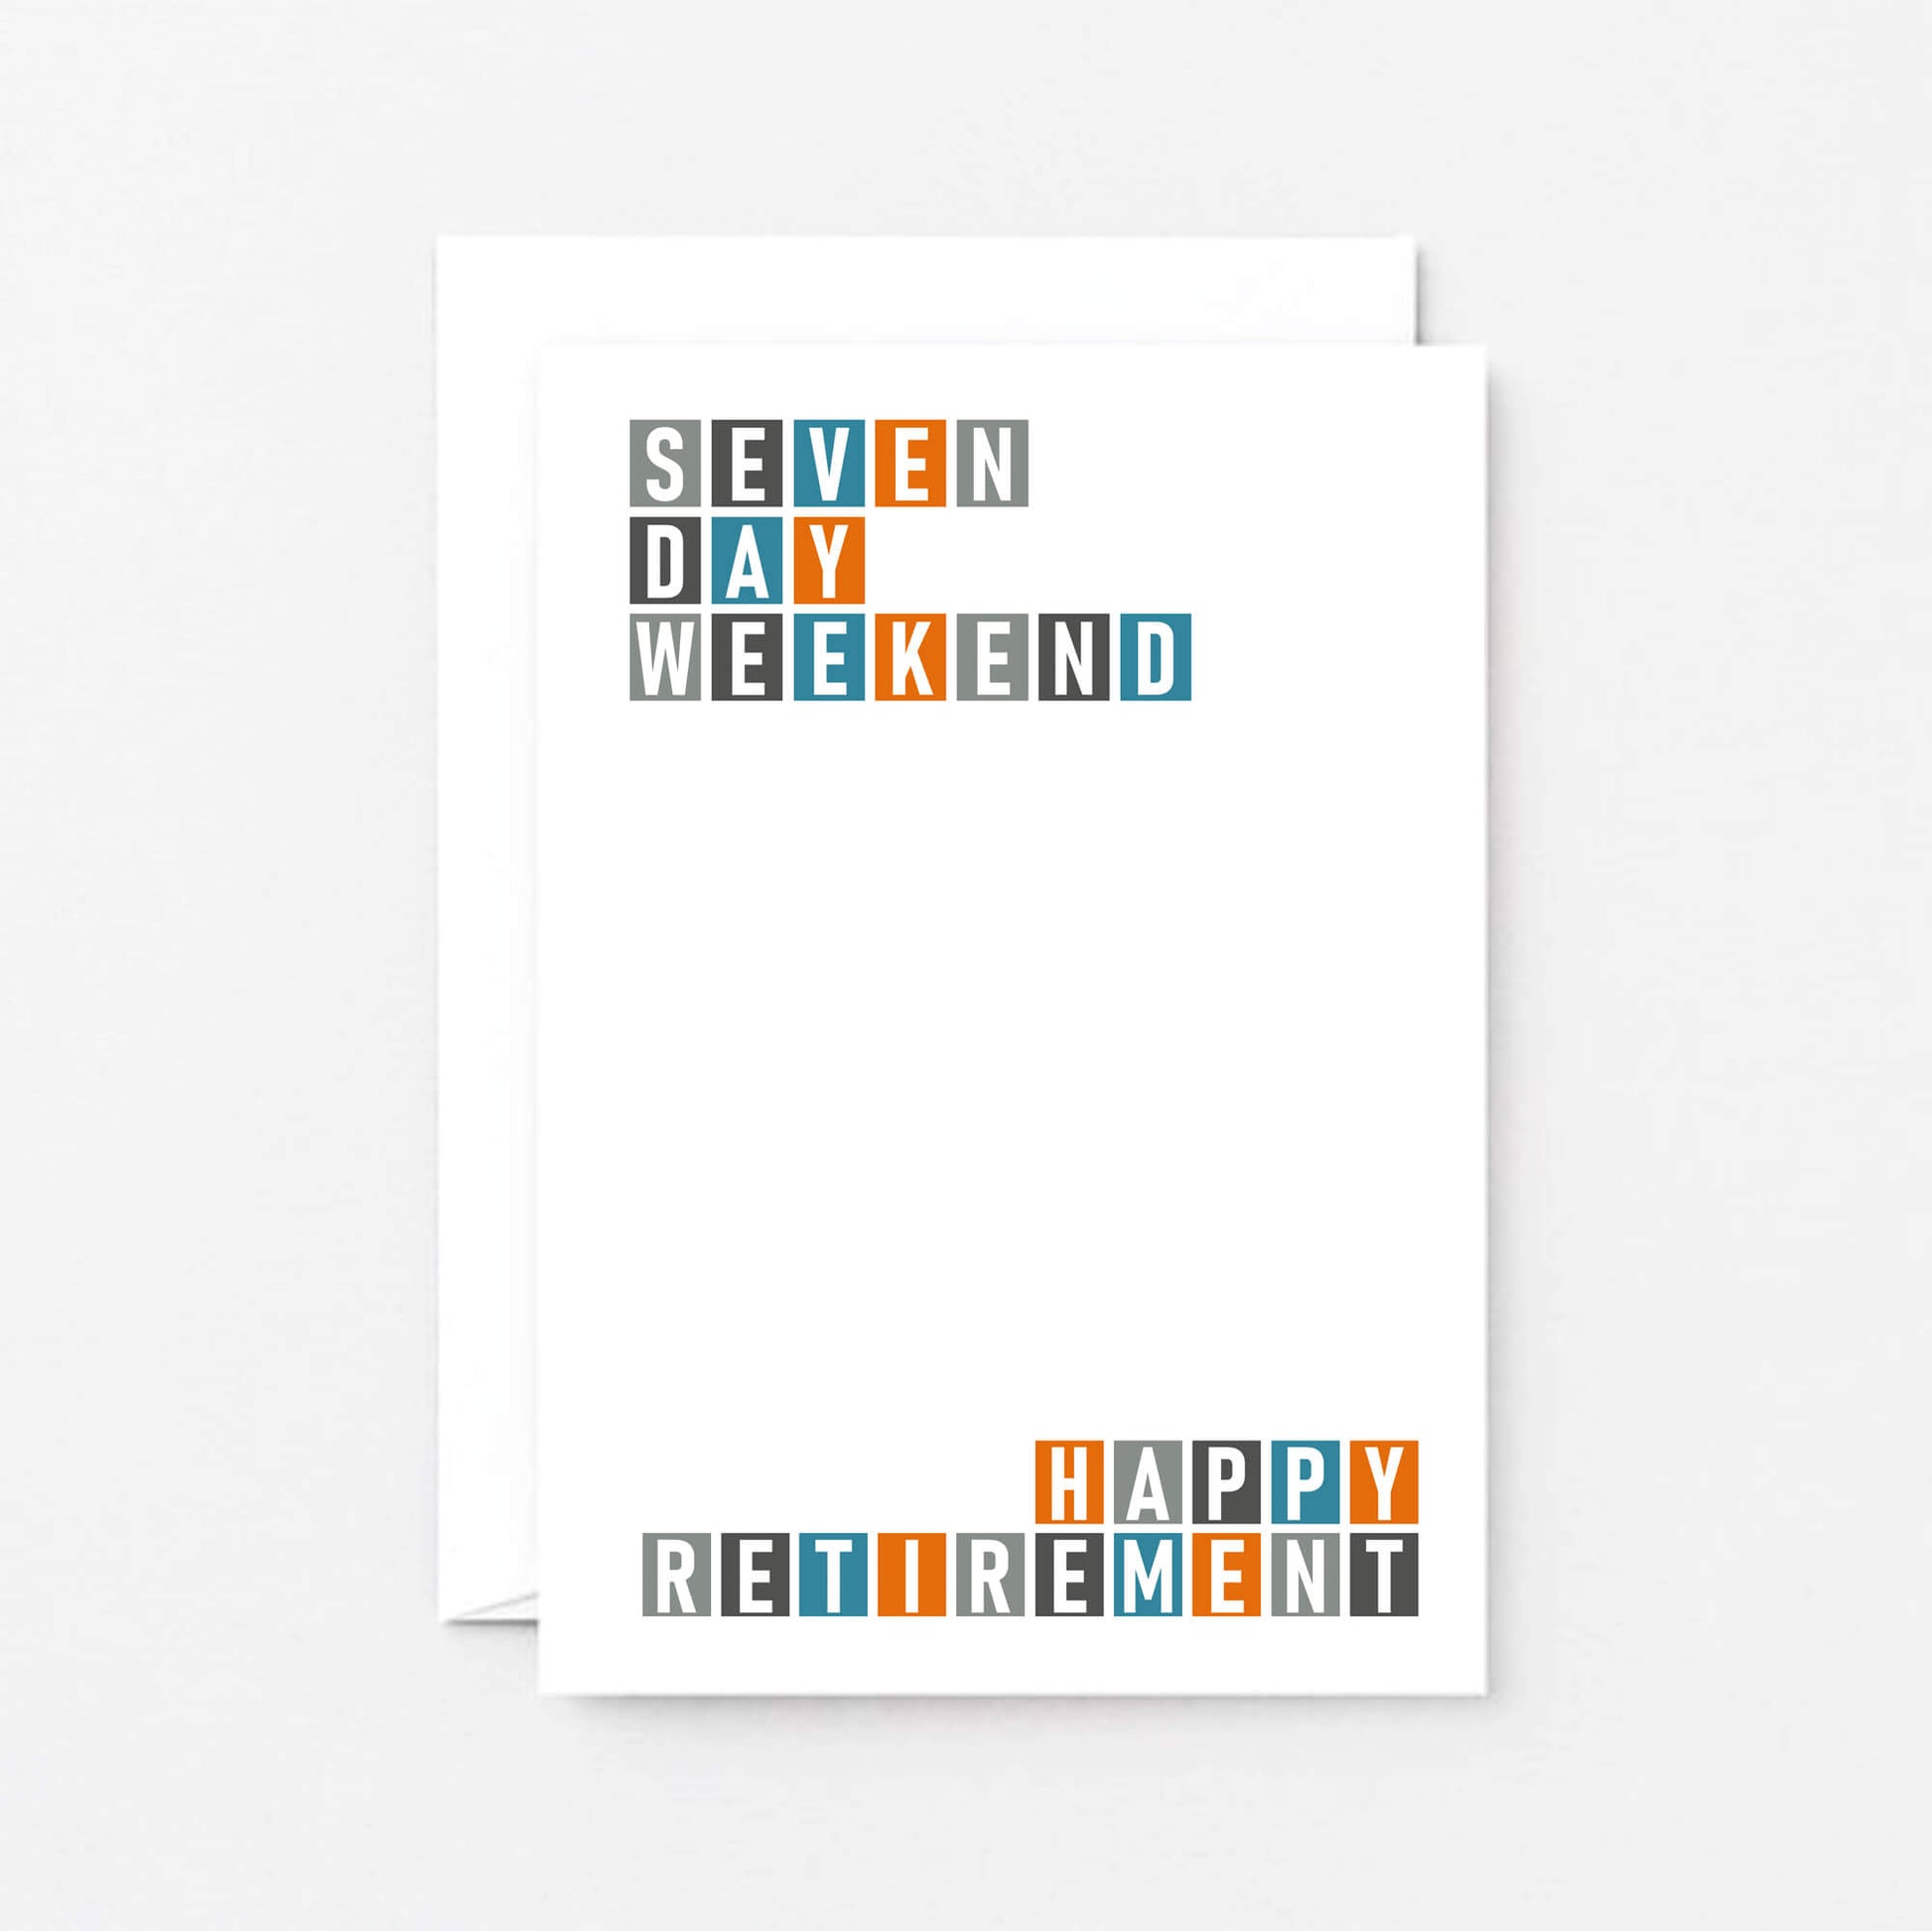 Retirement Card by SixElevenCreations. Reads Seven day weekend. Happy retirement. Product Code SE0329A6